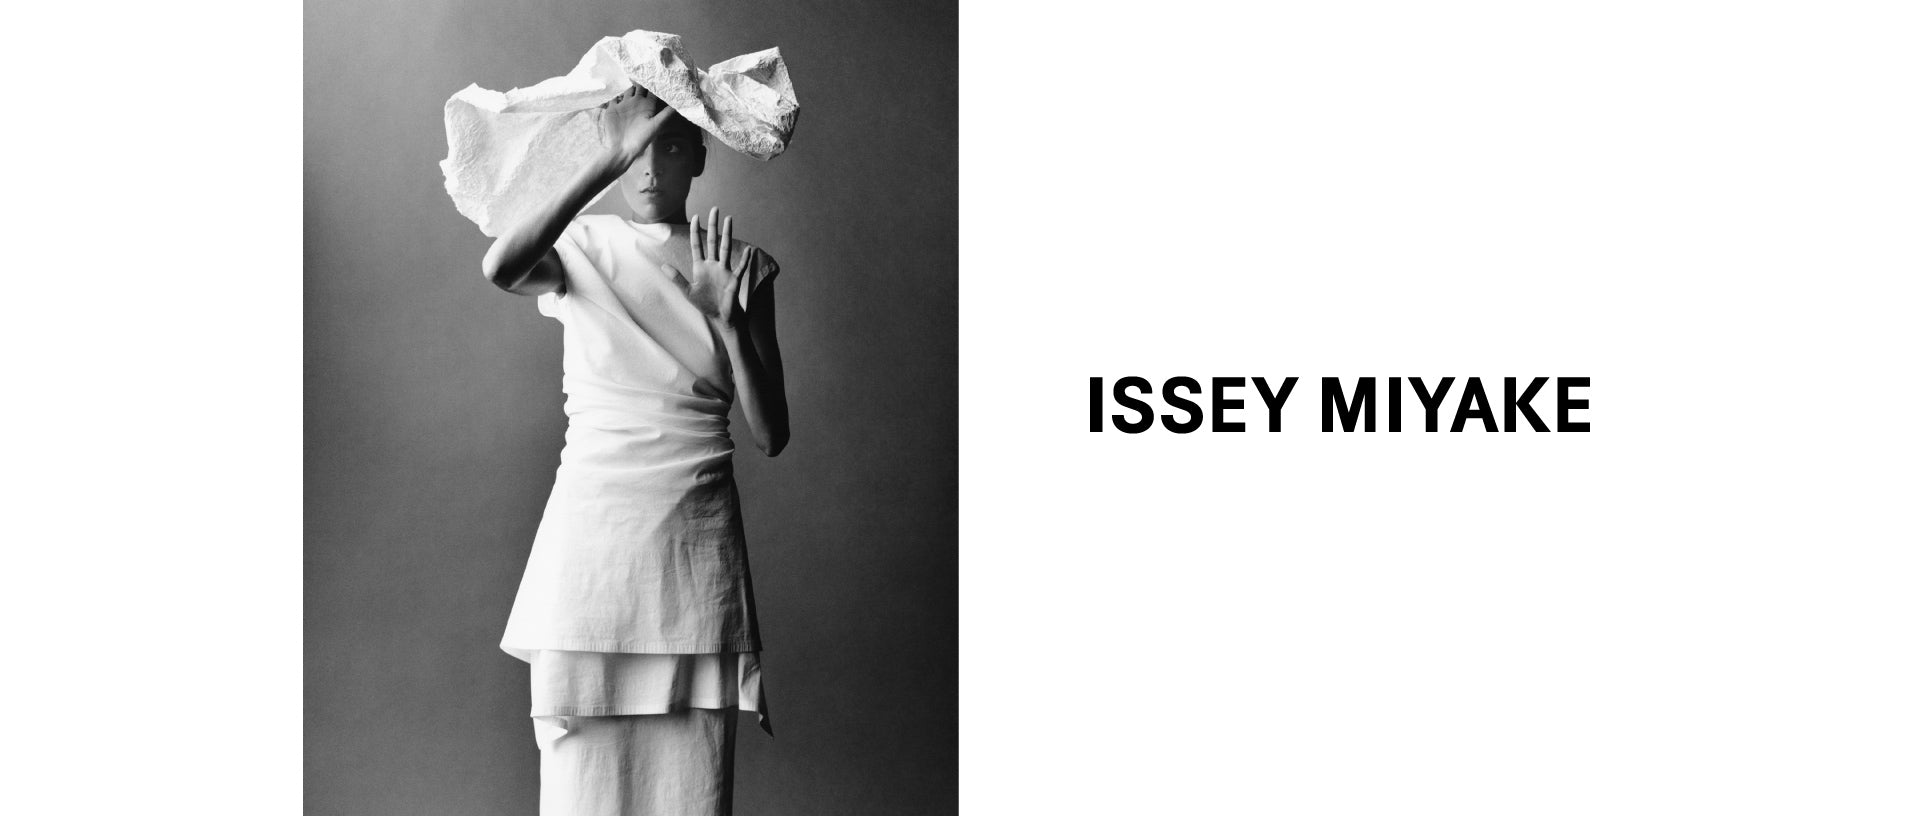 FLICK PANTS, The official ISSEY MIYAKE ONLINE STORE